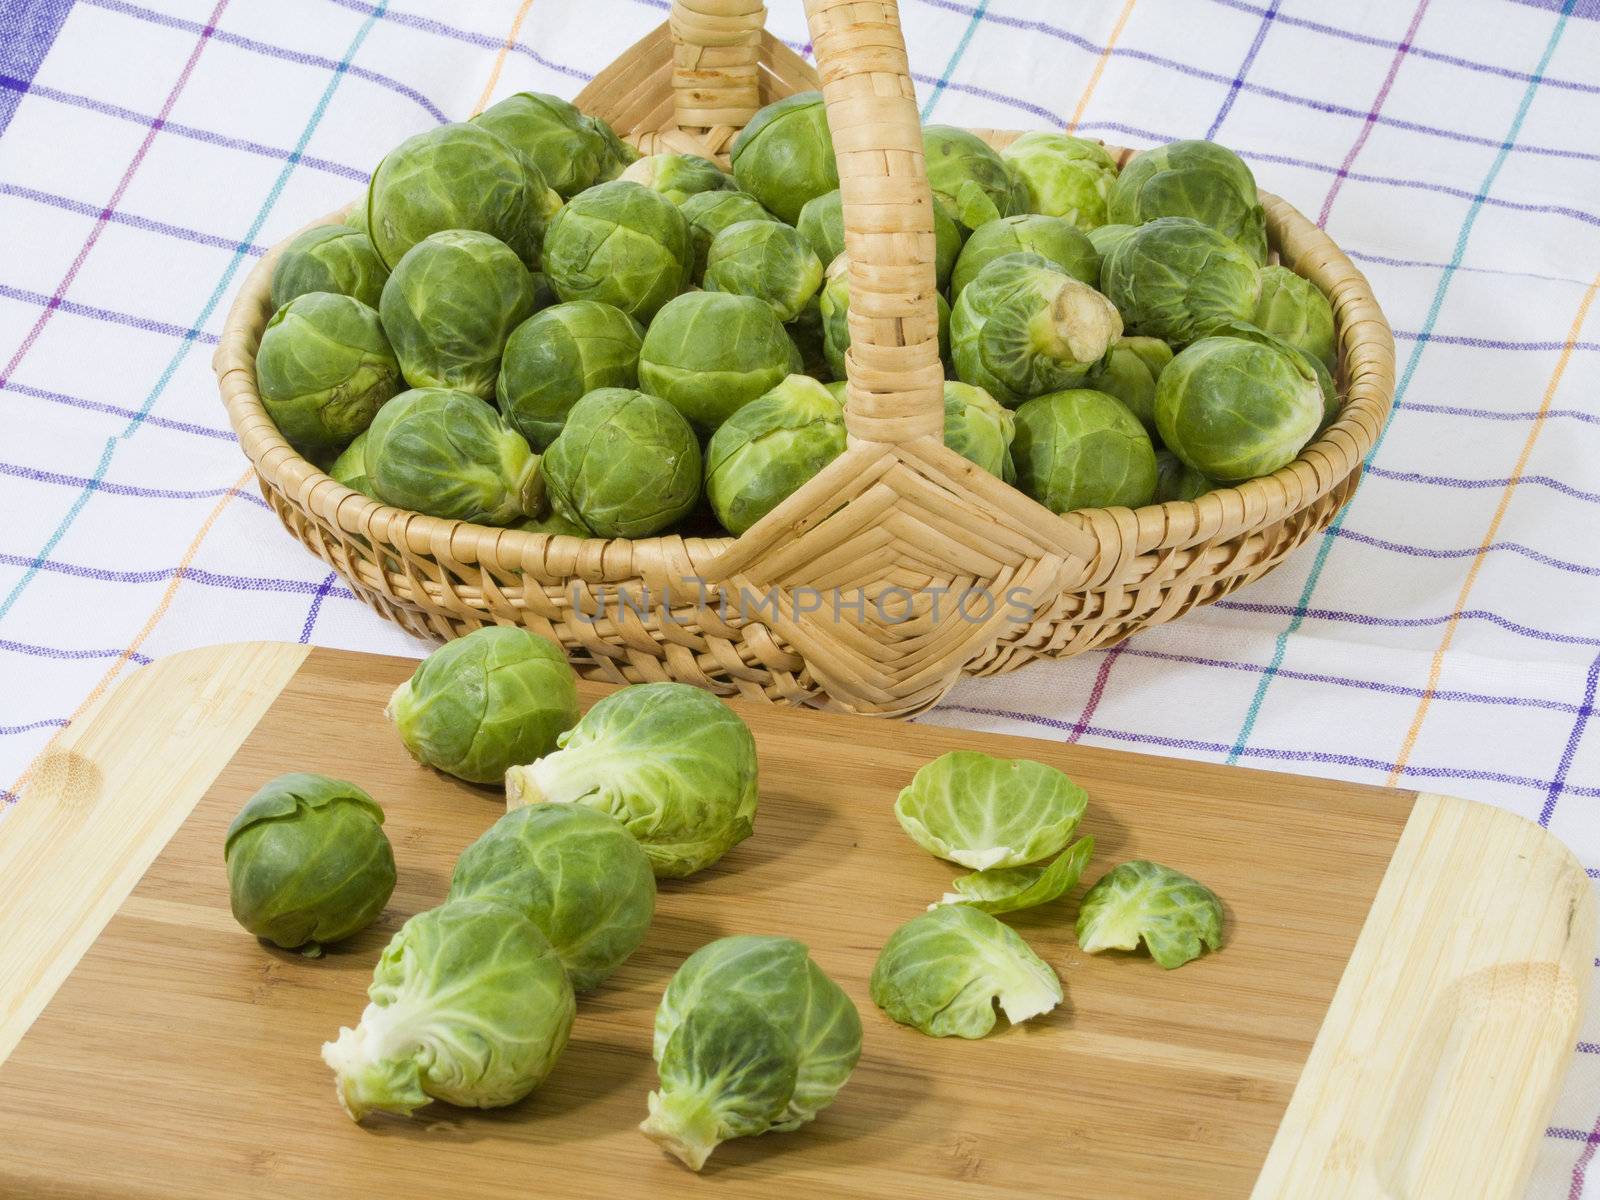 Fresh brussels sprouts by Teamarbeit